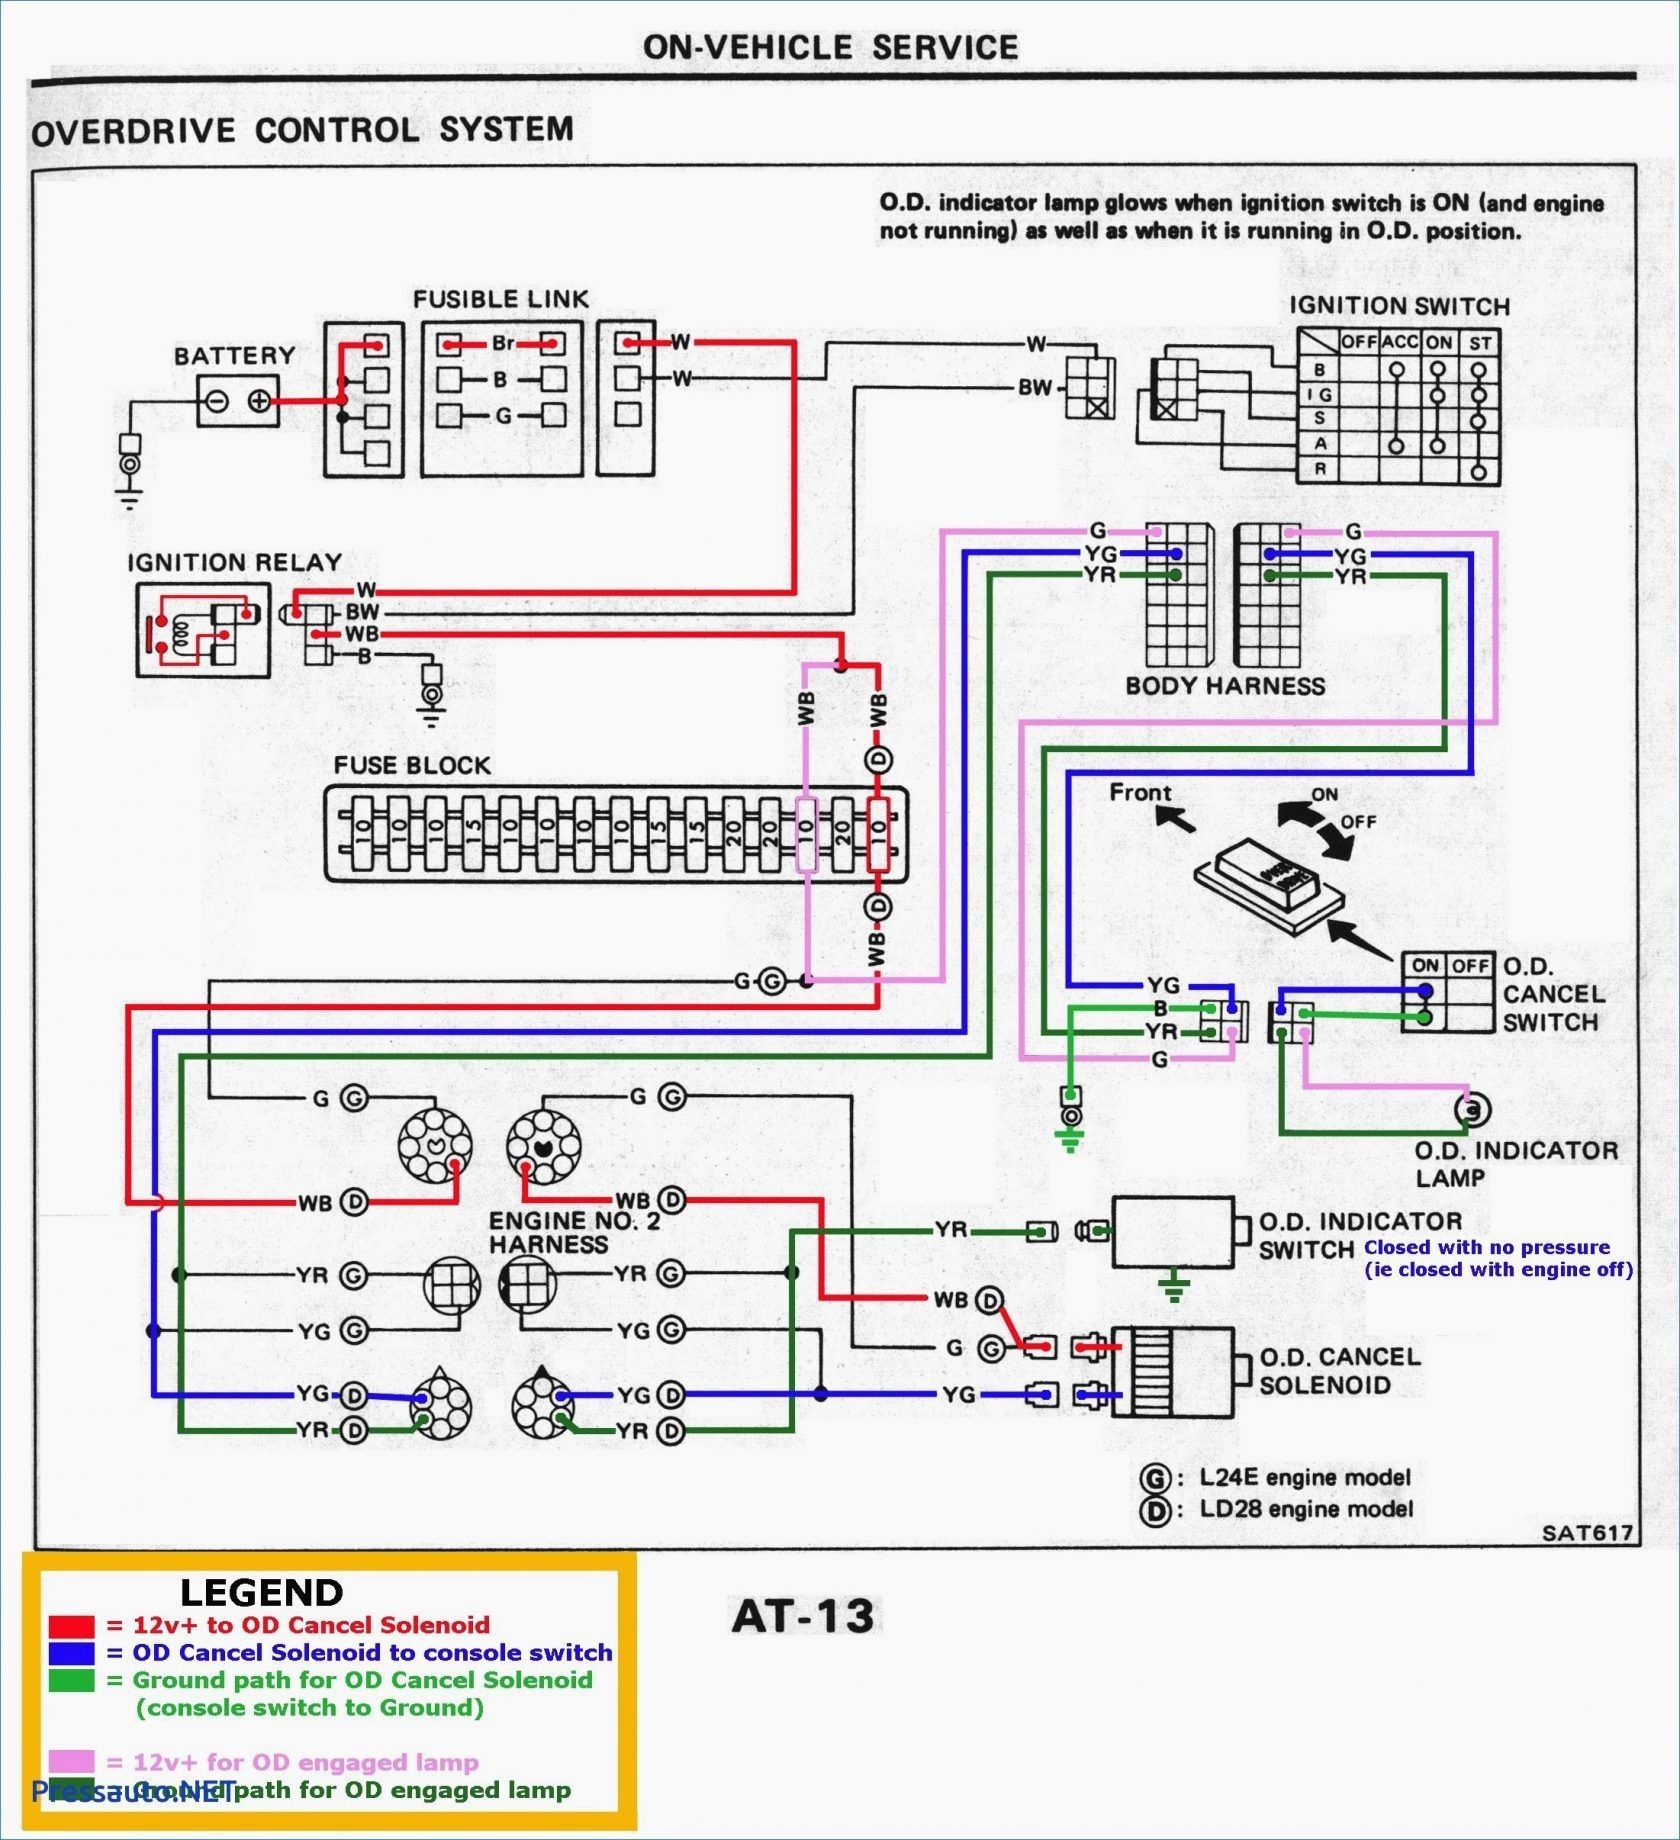 Bissell Proheat 2x Parts Diagram Carpet Cleaner Wiring Diagram Wiring Diagram New Of Bissell Proheat 2x Parts Diagram